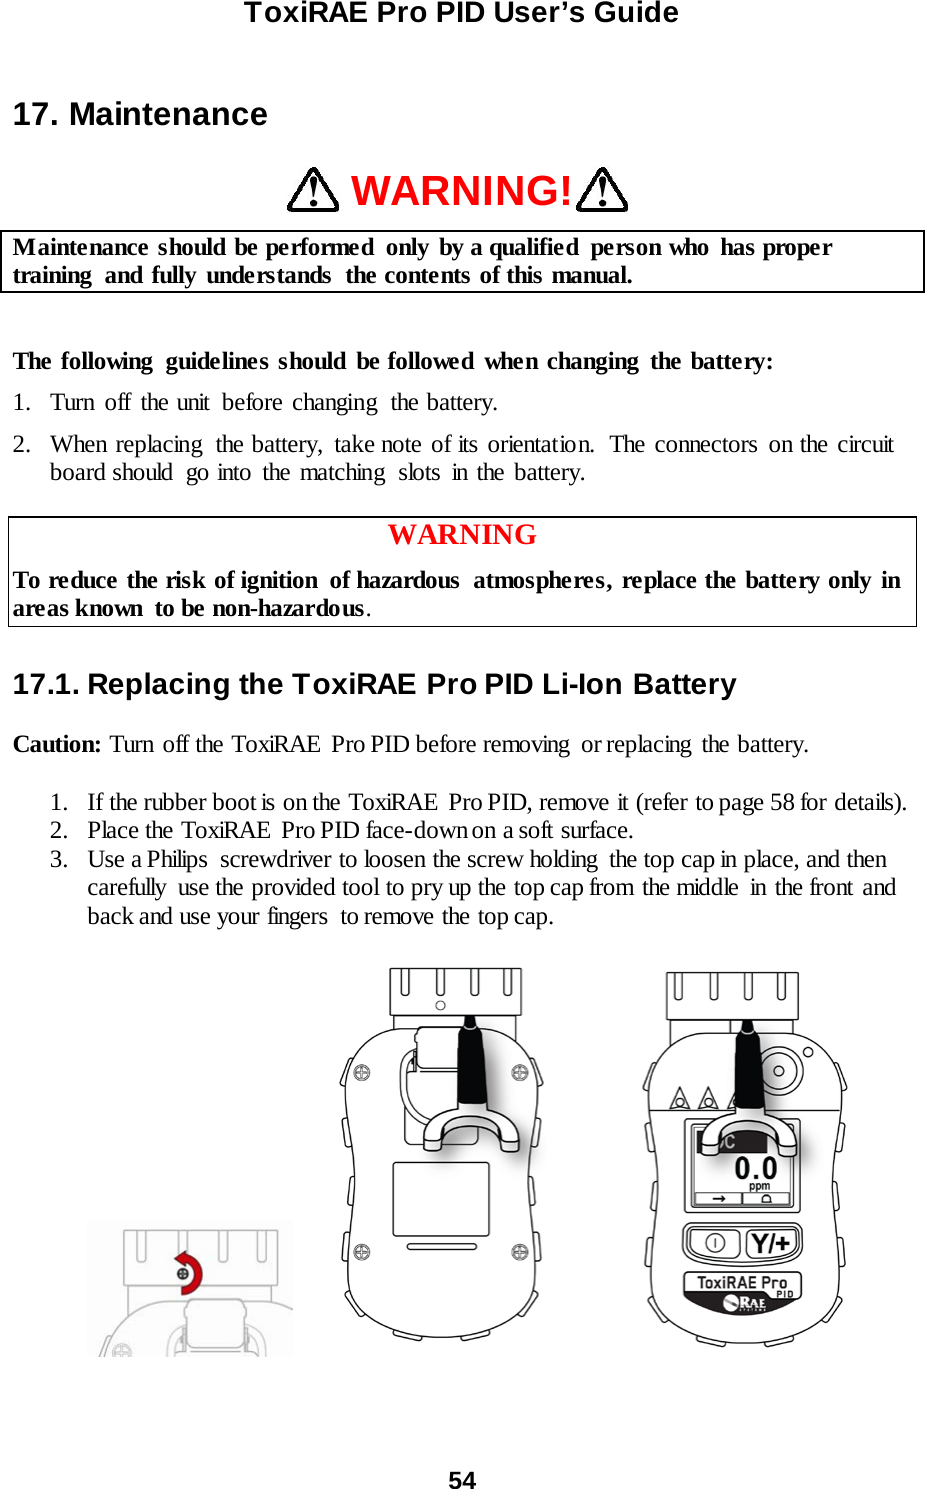 ToxiRAE Pro PID User’s Guide  54   17. Maintenance  WARNING! Maintenance should be performed  only by a qualified  person who  has proper training  and fully understands  the contents of this manual.  The following  guidelines should be followed when changing the battery: 1. Turn off the unit before changing the battery. 2. When replacing  the battery, take note of its orientatio n.  The connectors on the circuit board should go into the matching  slots in the battery.  WARNING To reduce the risk of ignition  of hazardous  atmospheres, replace the battery only in areas known  to be non-hazardous.  17.1. Replacing the ToxiRAE Pro PID Li-Ion Battery  Caution: Turn off the ToxiRAE  Pro PID before removing  or replacing  the battery.  1. If the rubber boot is on the ToxiRAE Pro PID, remove it (refer to page 58 for details). 2. Place the ToxiRAE  Pro PID face-down on a soft surface. 3. Use a Philips  screwdriver to loosen the screw holding  the top cap in place, and then carefully  use the provided tool to pry up the top cap from the middle  in the front and back and use your fingers  to remove the top cap.              